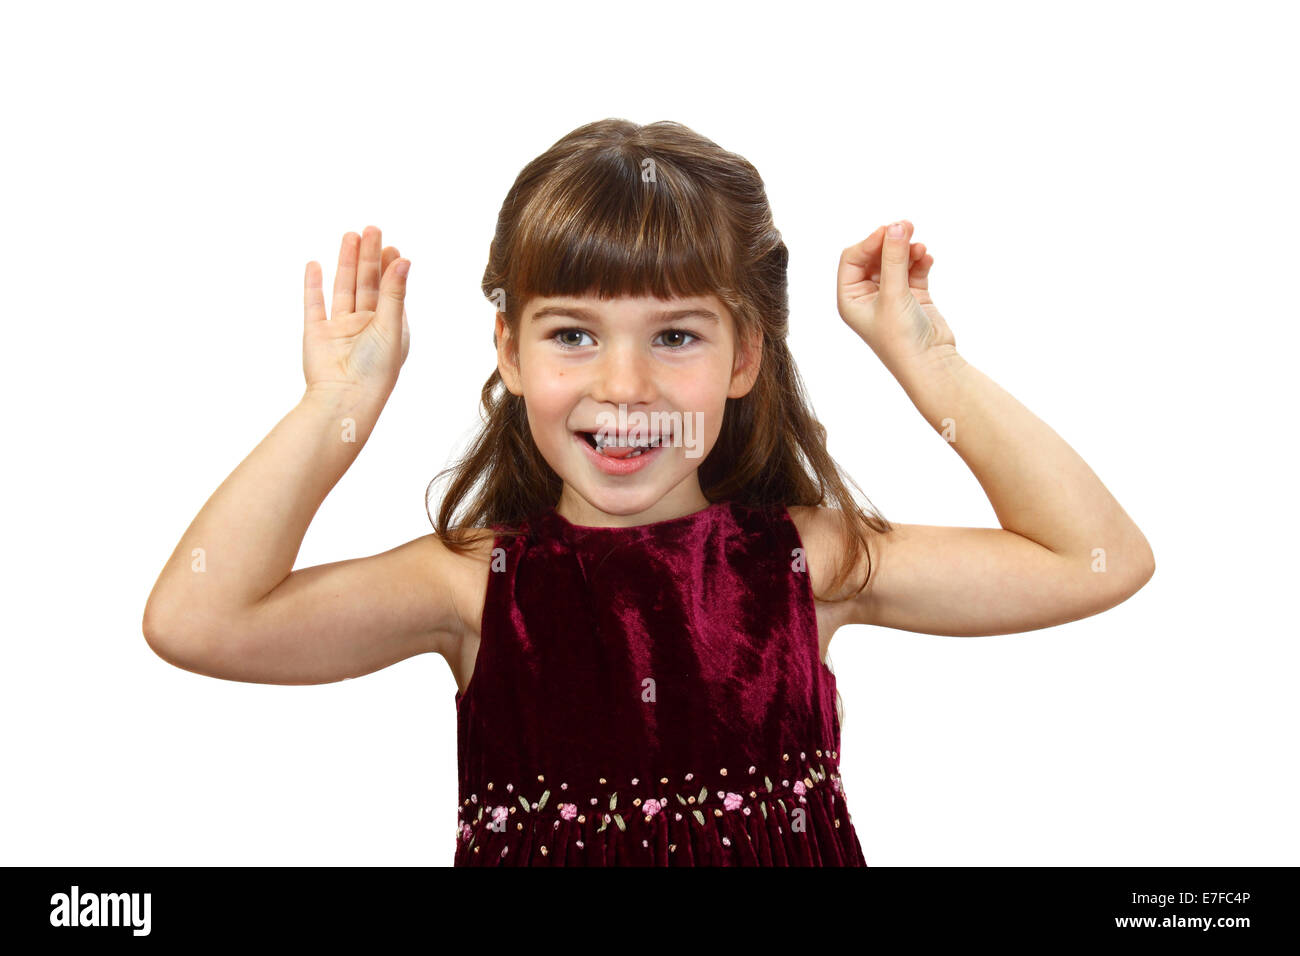 Cute little girl teases. Portrait isolated on white background Stock Photo